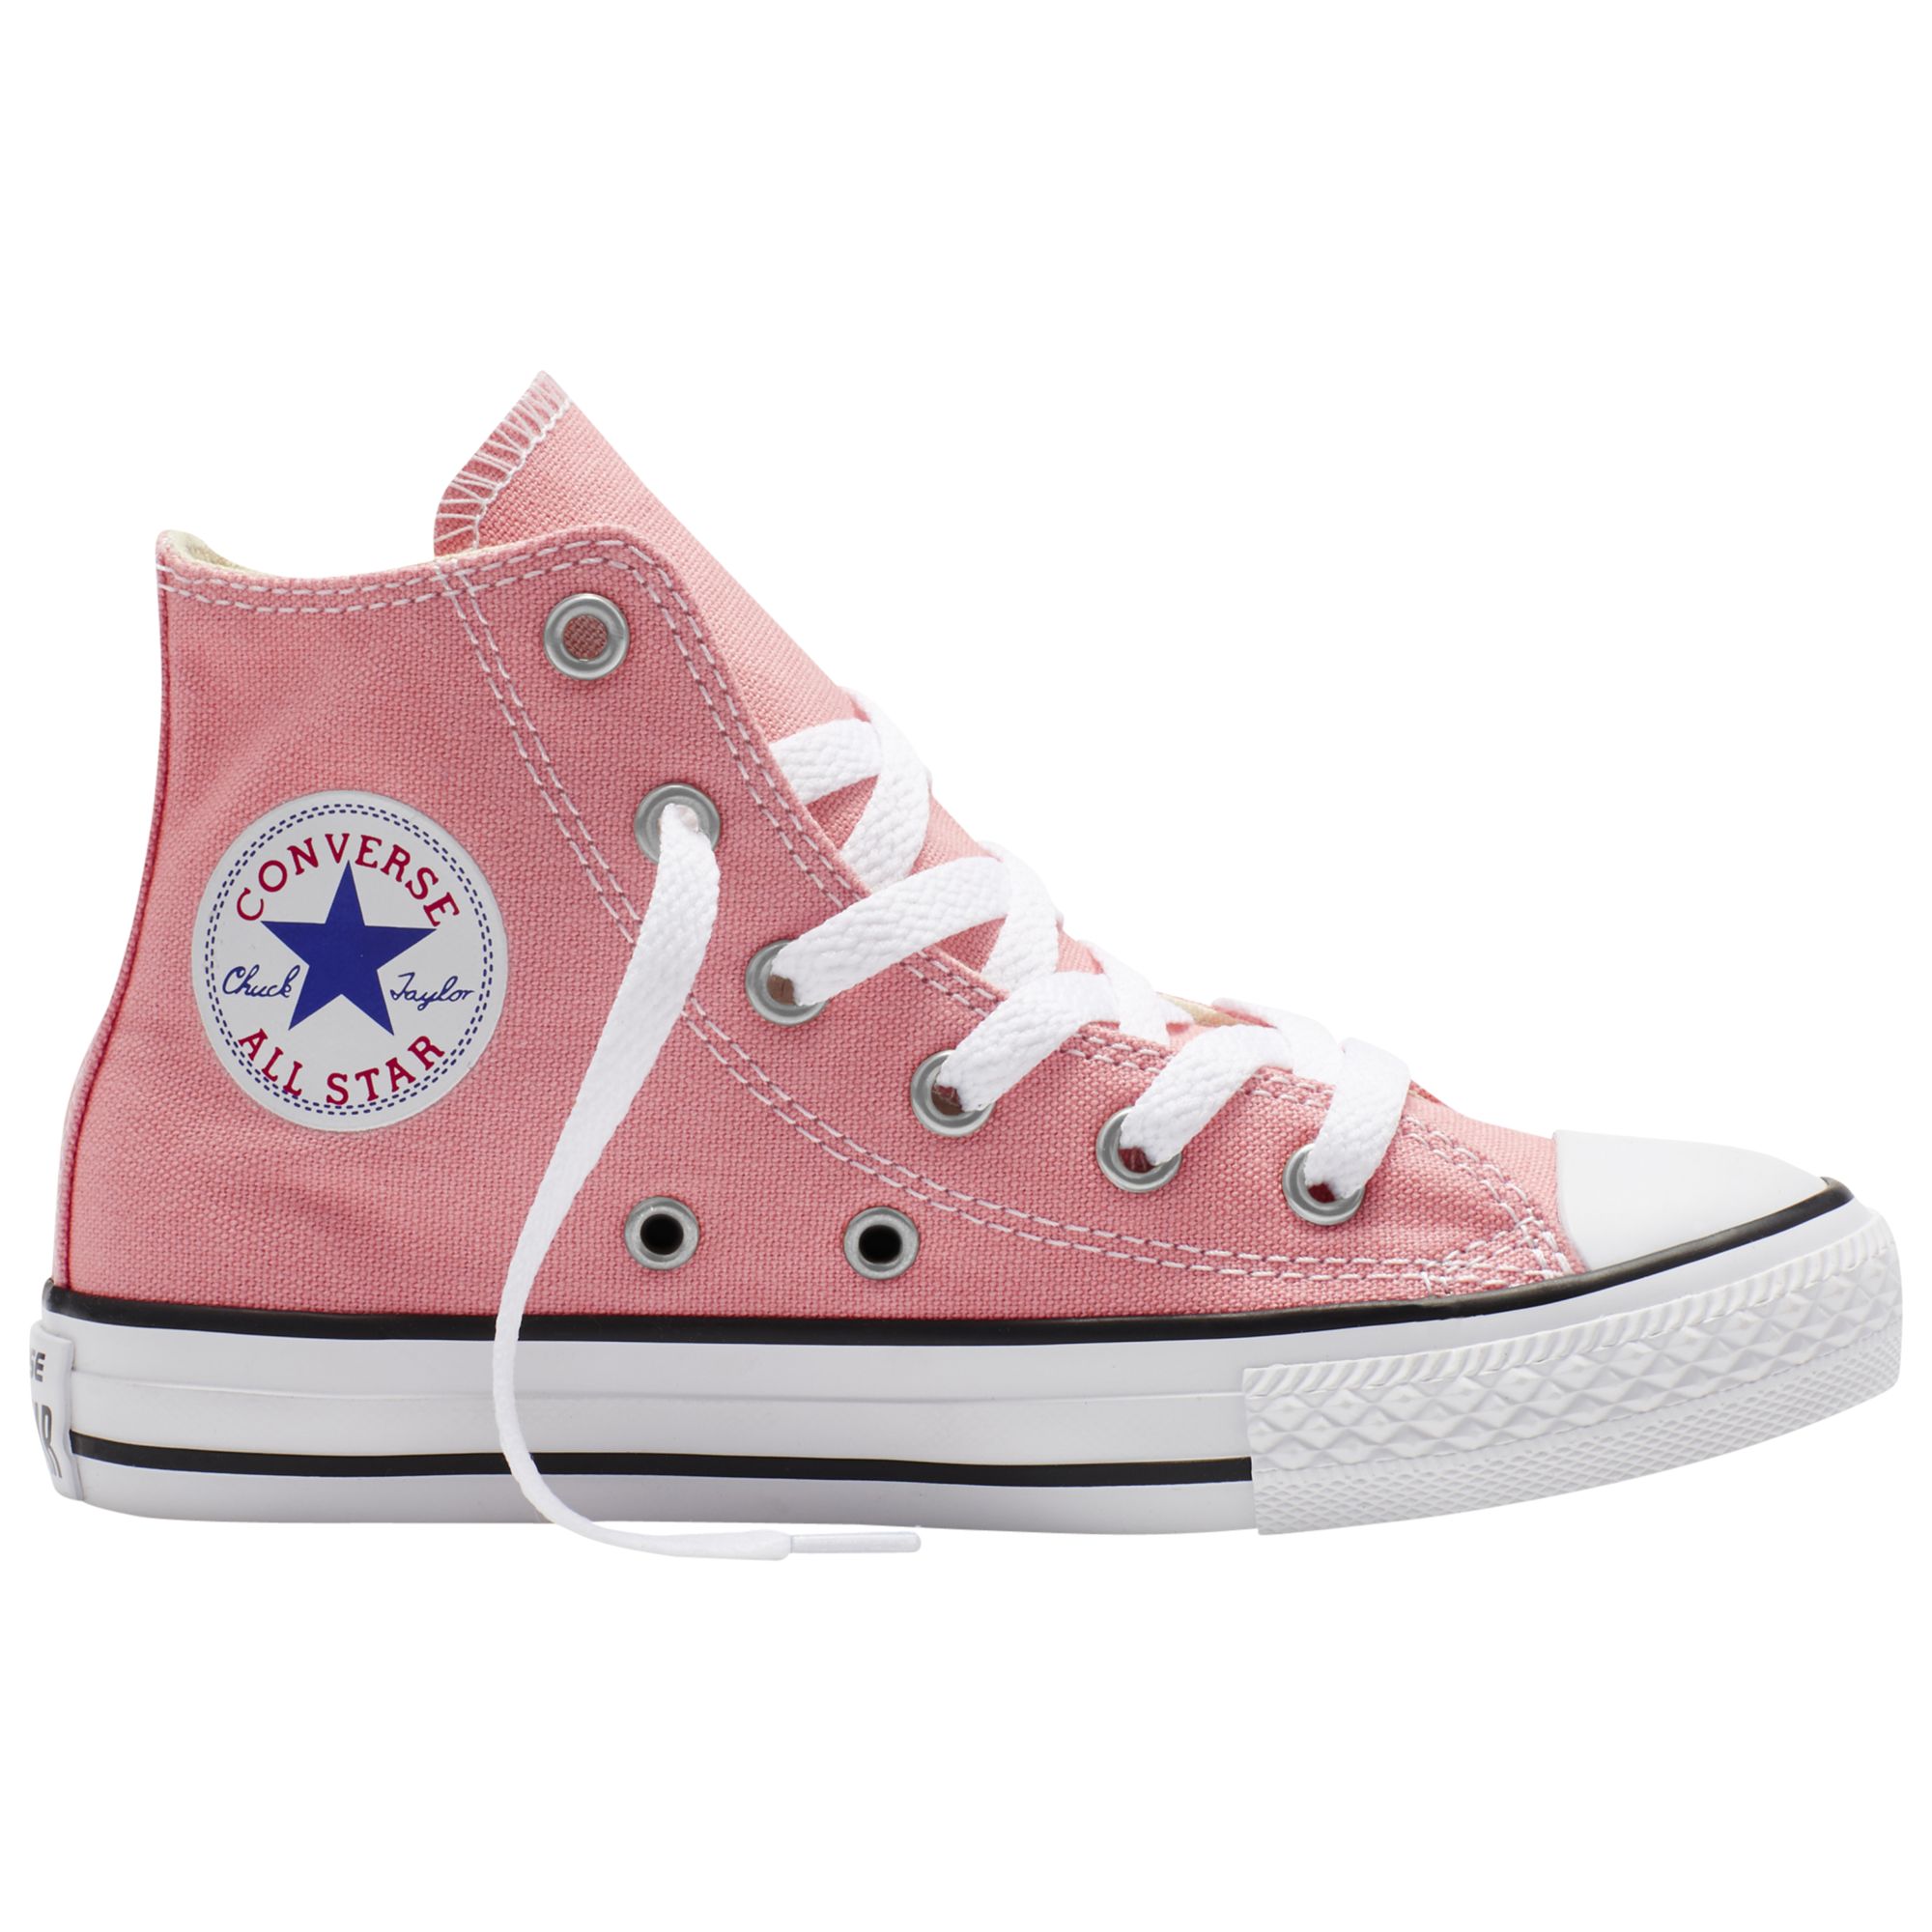 chuck taylor all star classic pink